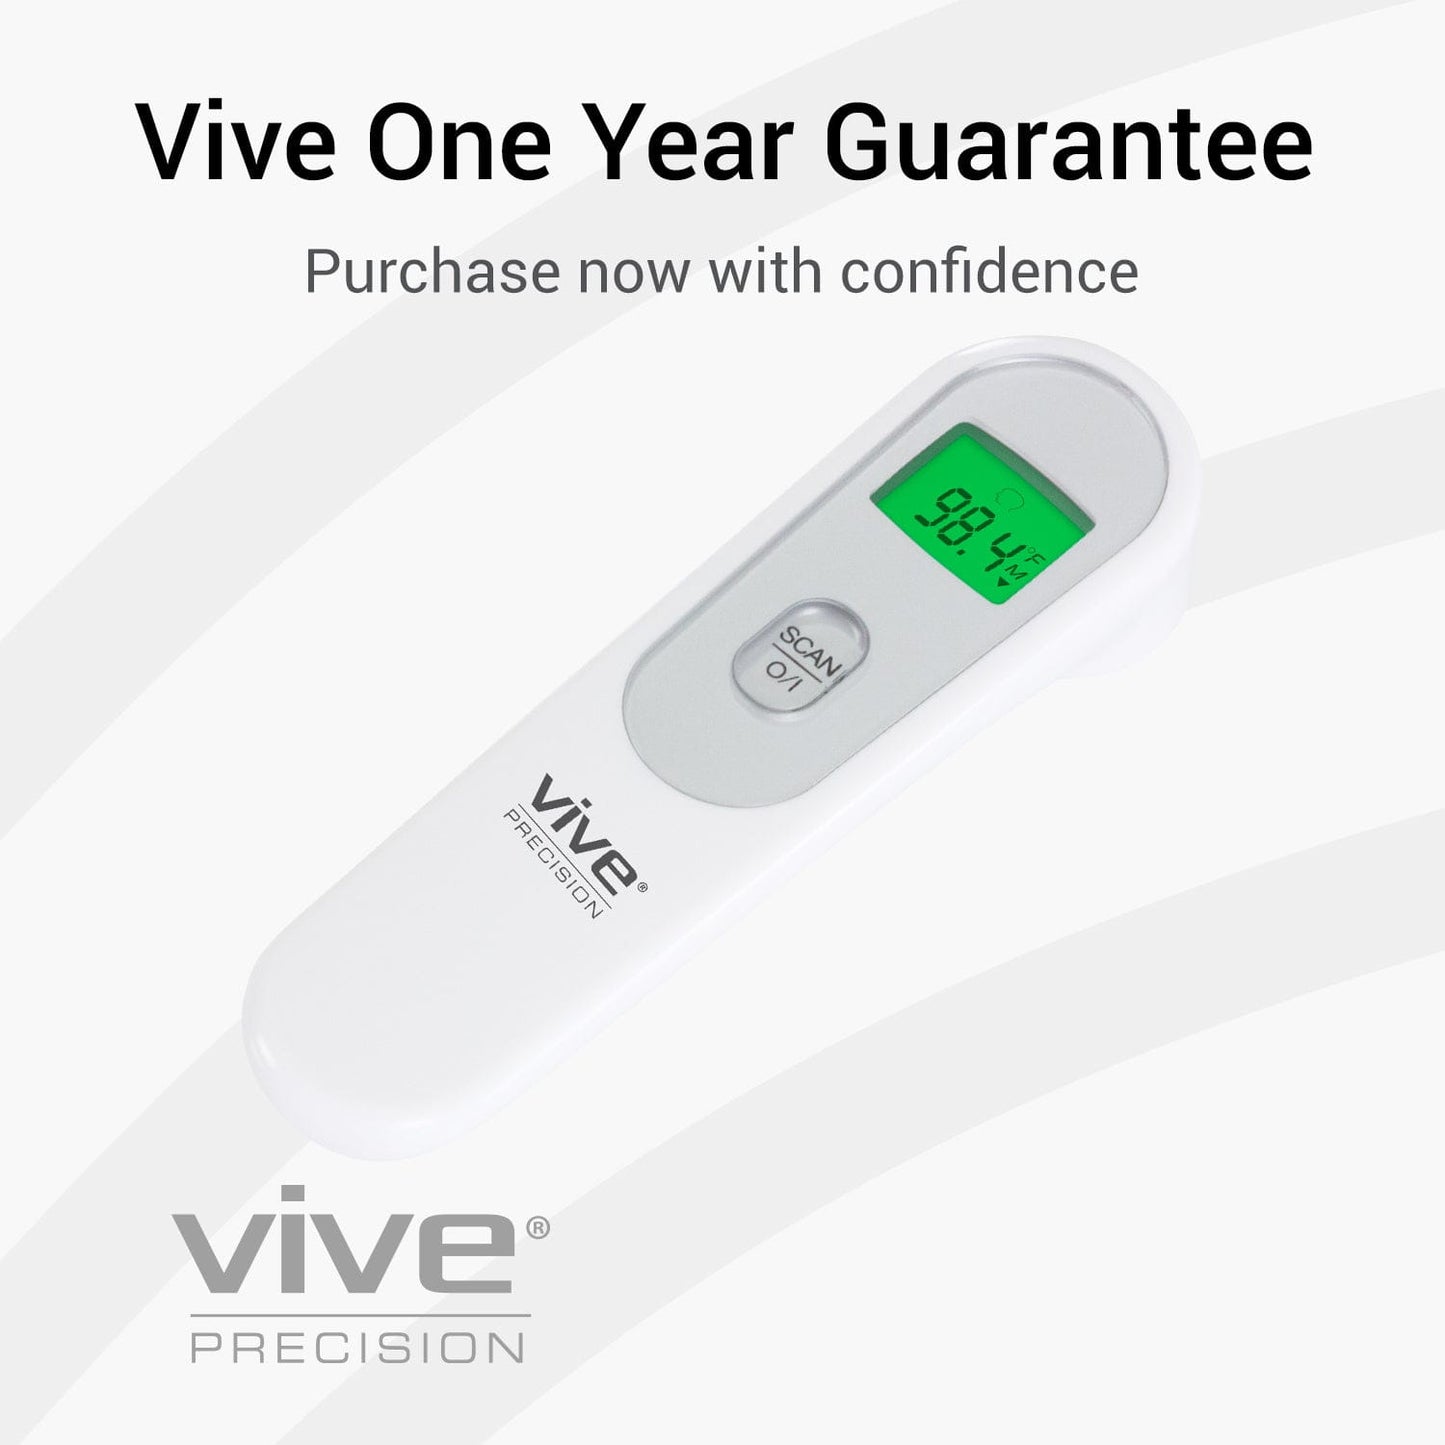 Vive Health Infrared Thermometer